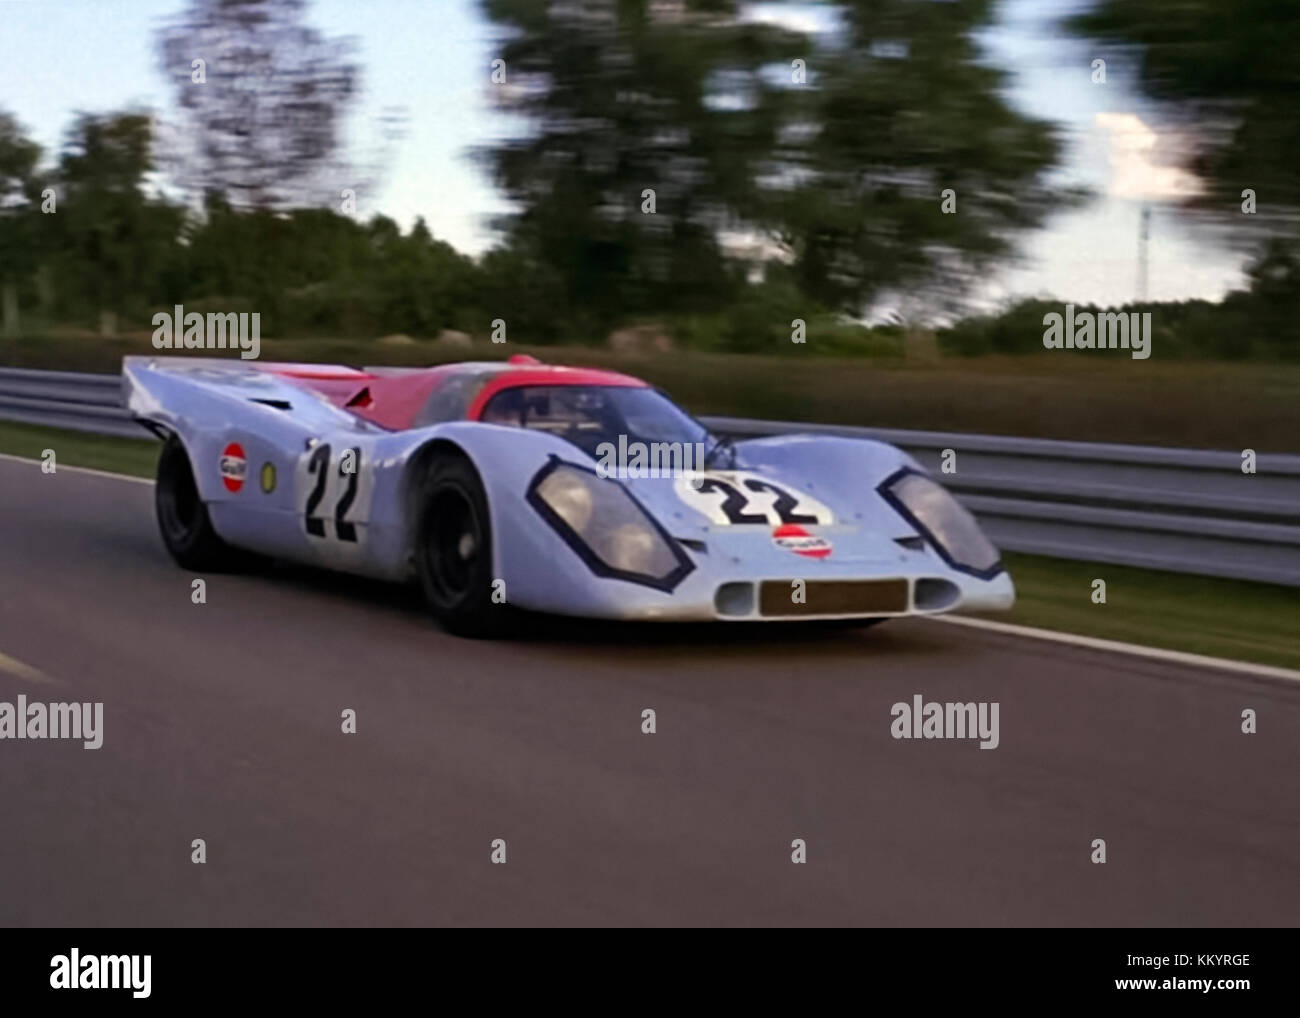 Steve McQueen as racing car driver Michael Delaney driving for Gulf Team in a Porsche 917 from ‘Le Mans’ (1971) directed by Lee H. Katzin. Stock Photo